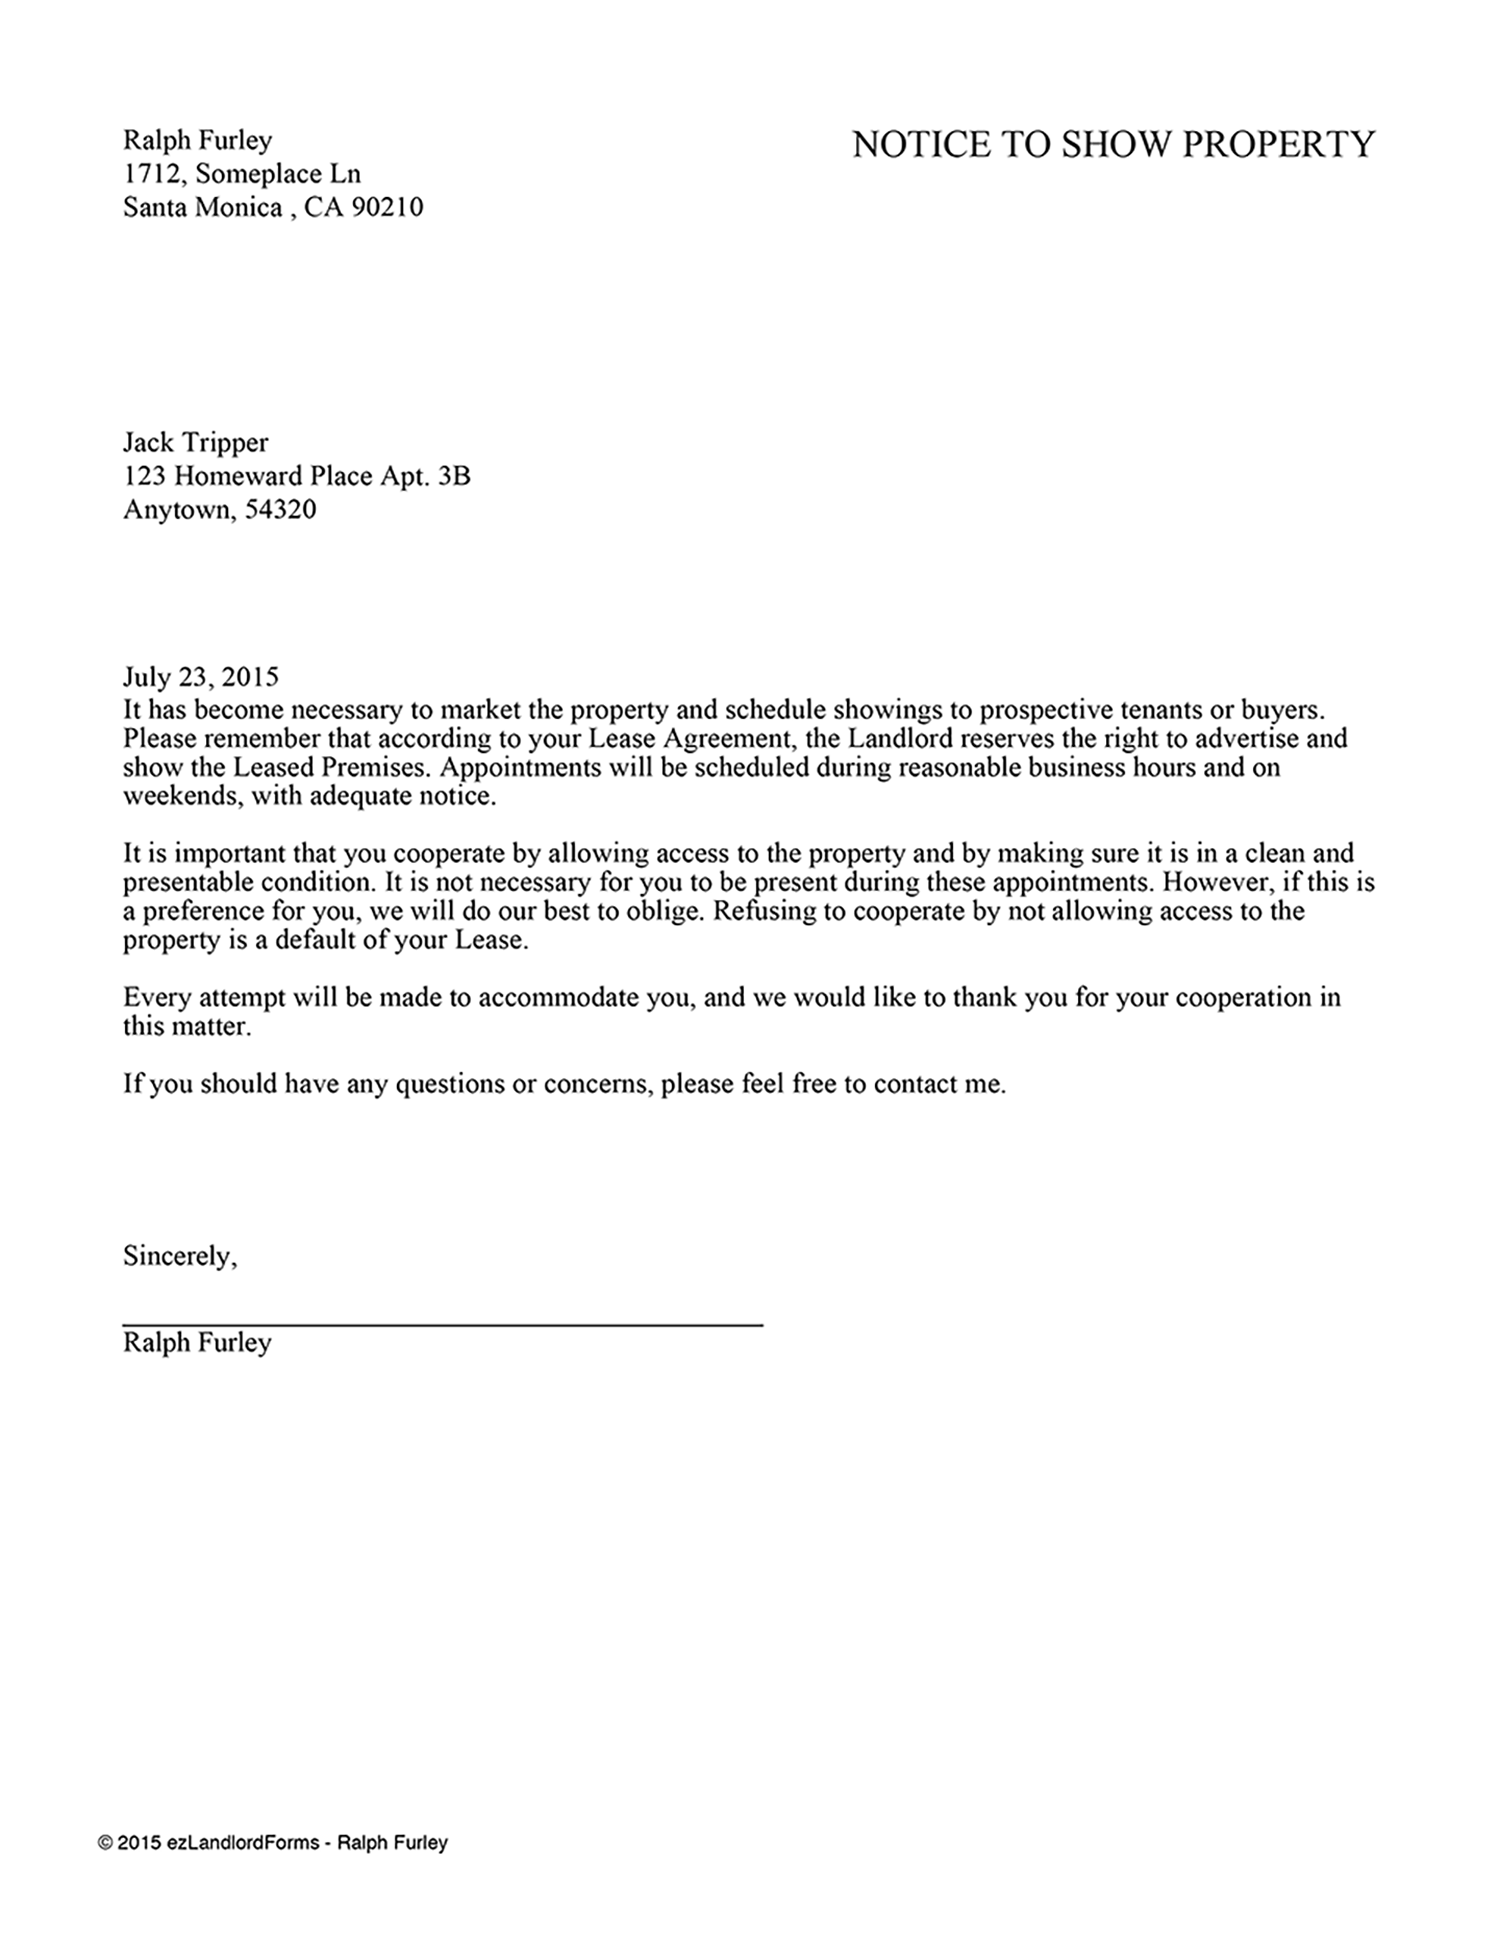 Free Sample Letter Of Intent To Sell Property from www.ezlandlordforms.com